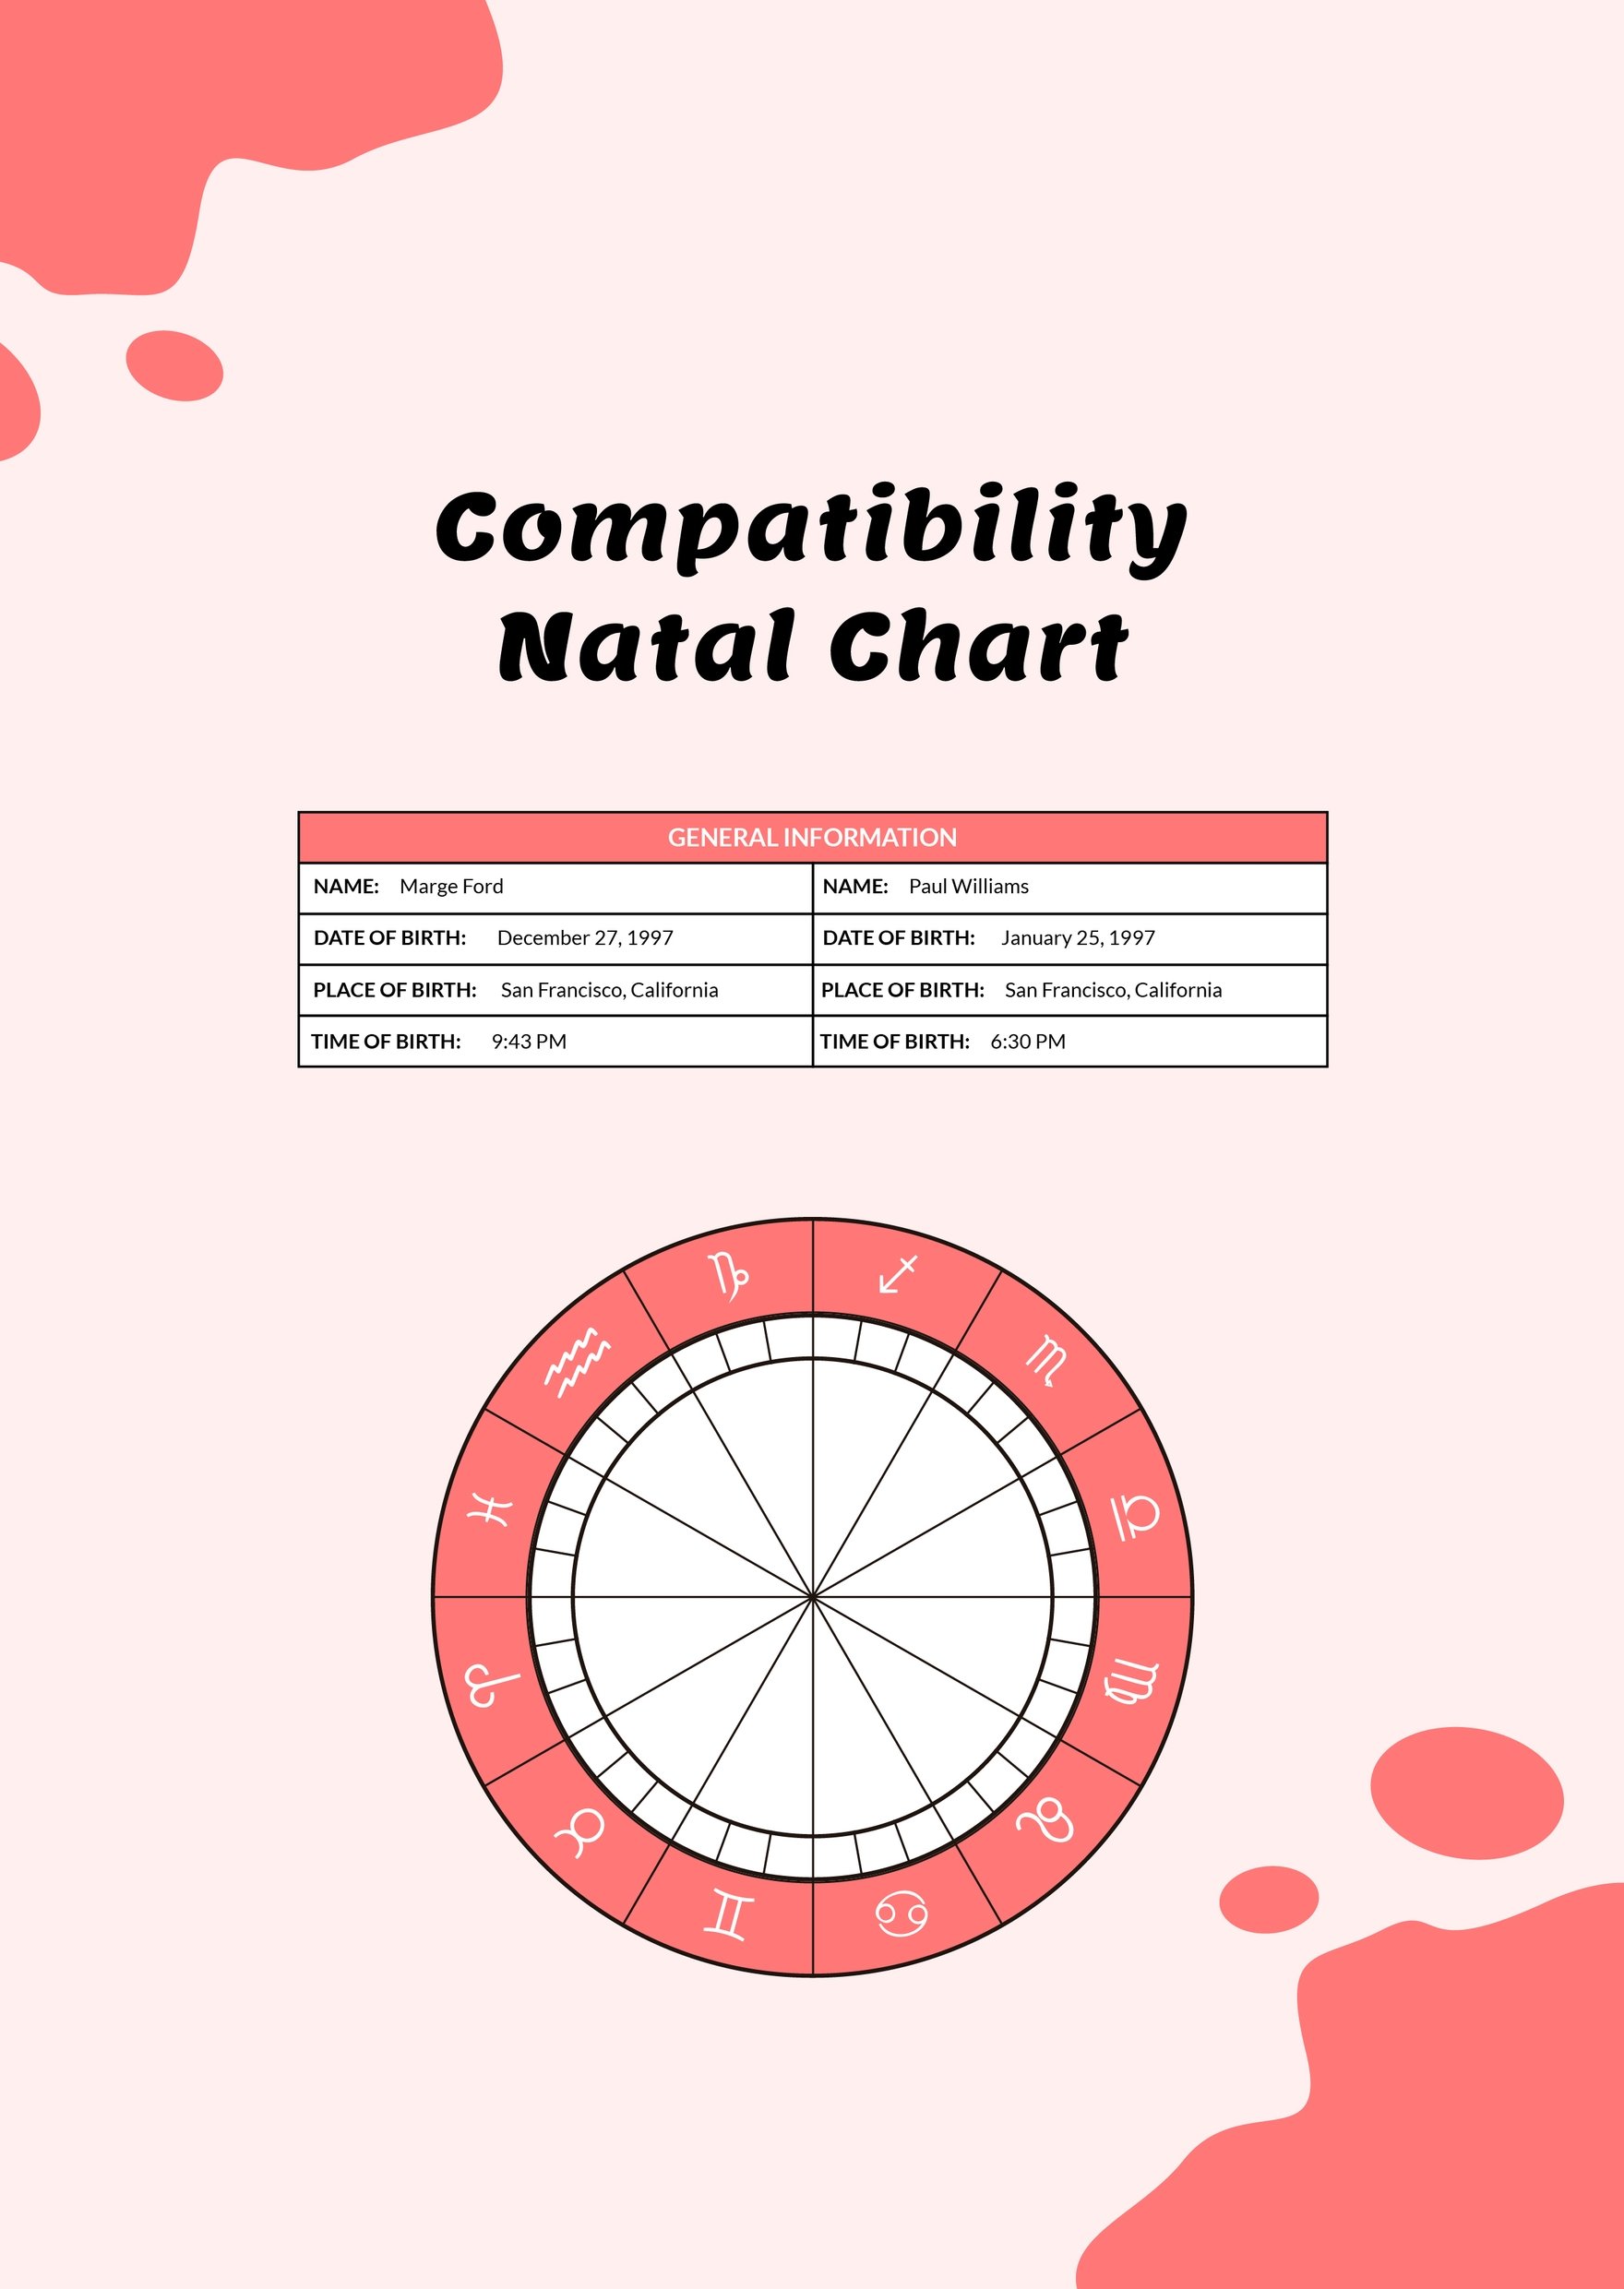 Free Compatibility Natal Chart Template in PDF, Illustrator